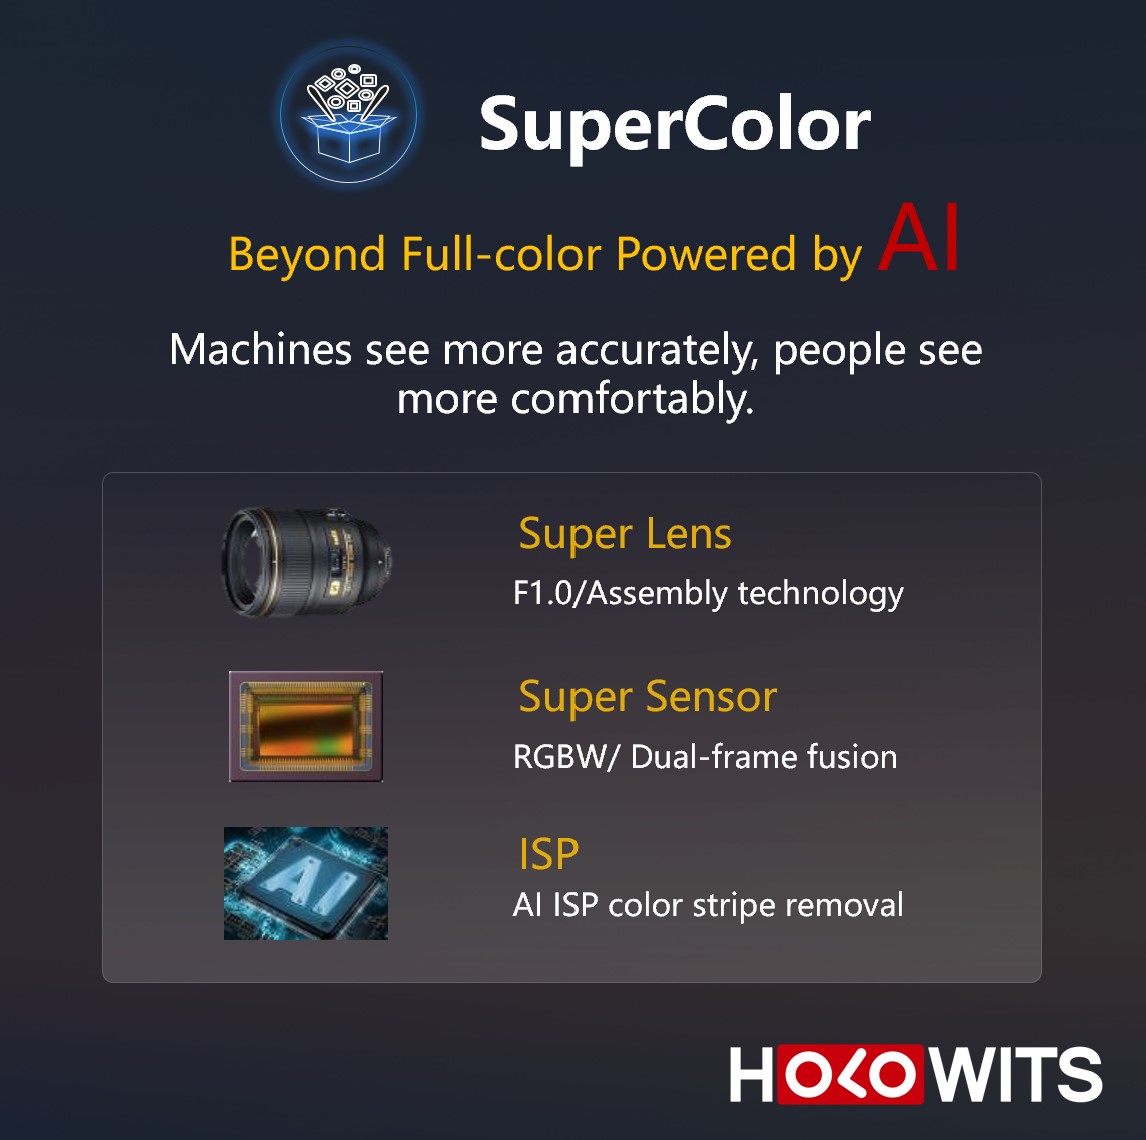 #HOLOWITS AI Root Tech

HOLOWITS SuperColor Help to Break Through The Darkness! 🌖

#supercolor #AICamera #AI #iot